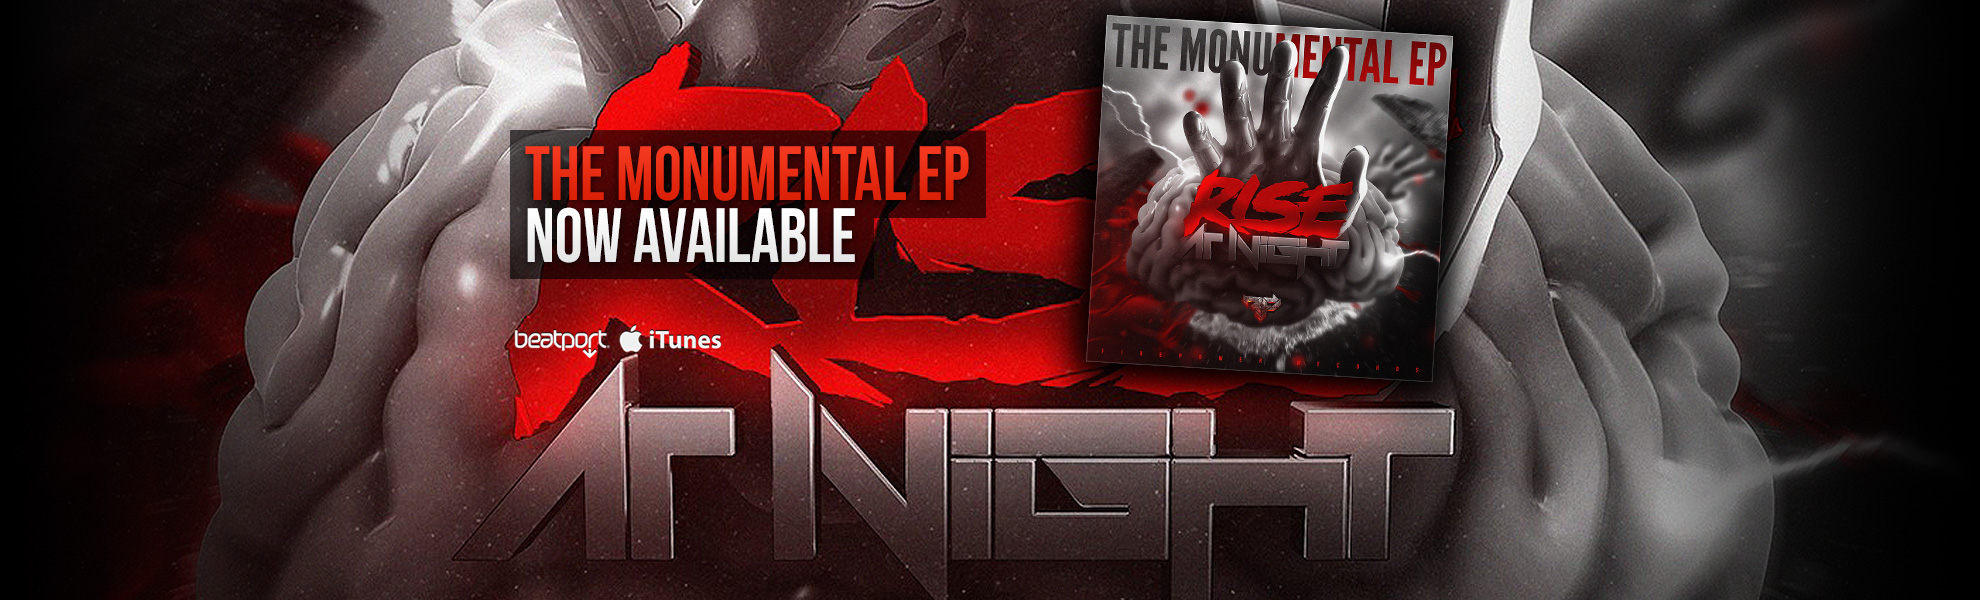 The Monumental EP